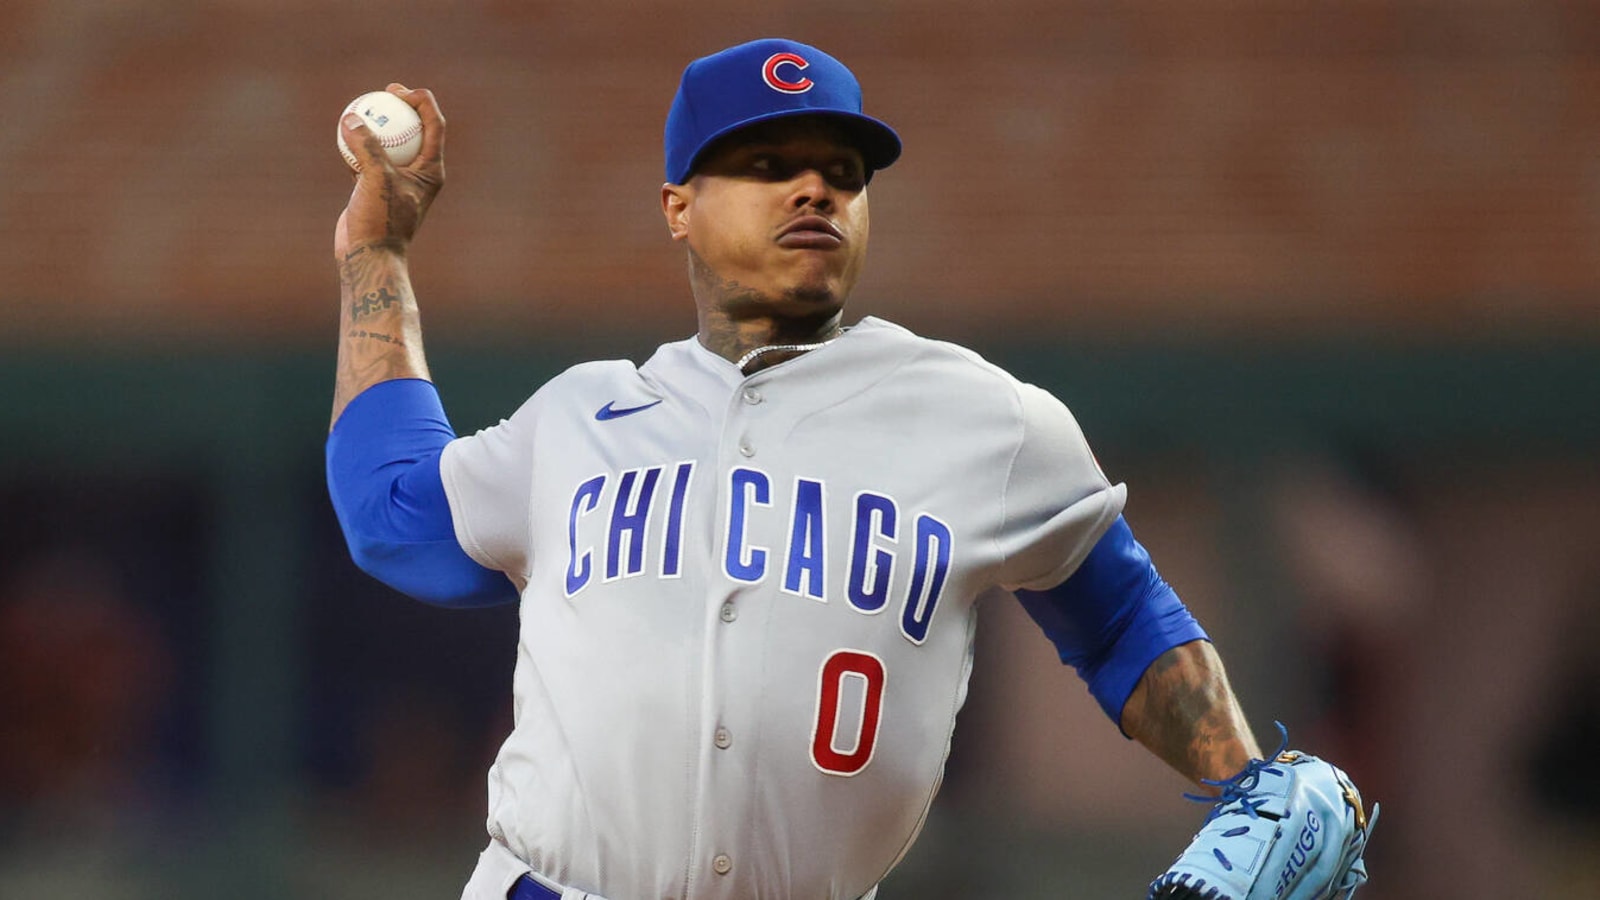 Signing Marcus Stroman could be a disaster for the Yankees